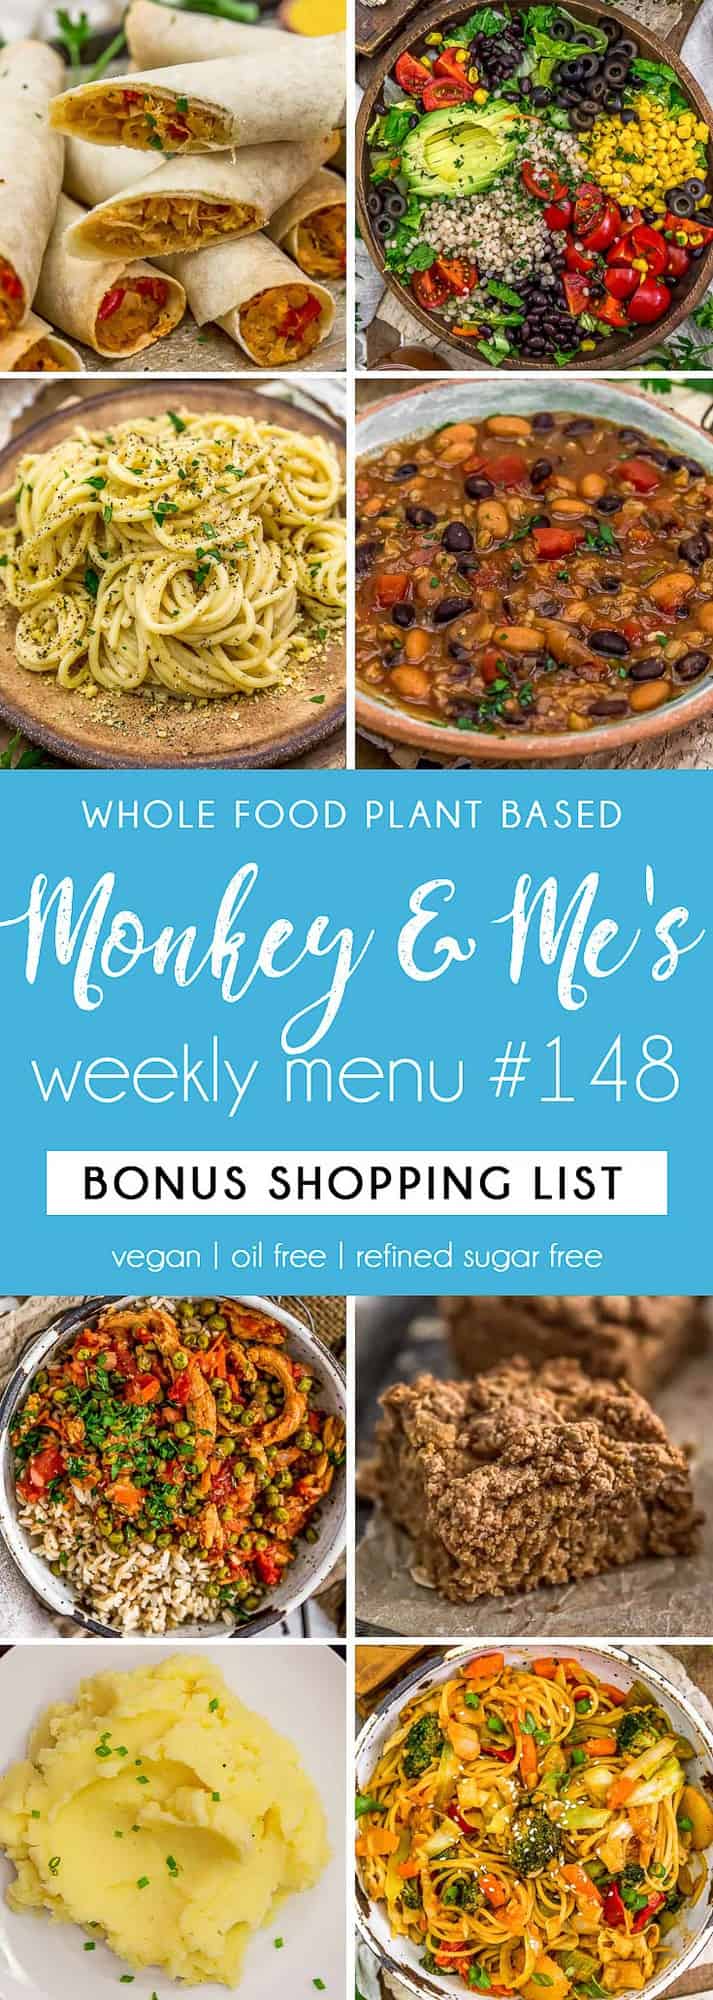 Monkey and Me's Menu 148 featuring 8 recipes